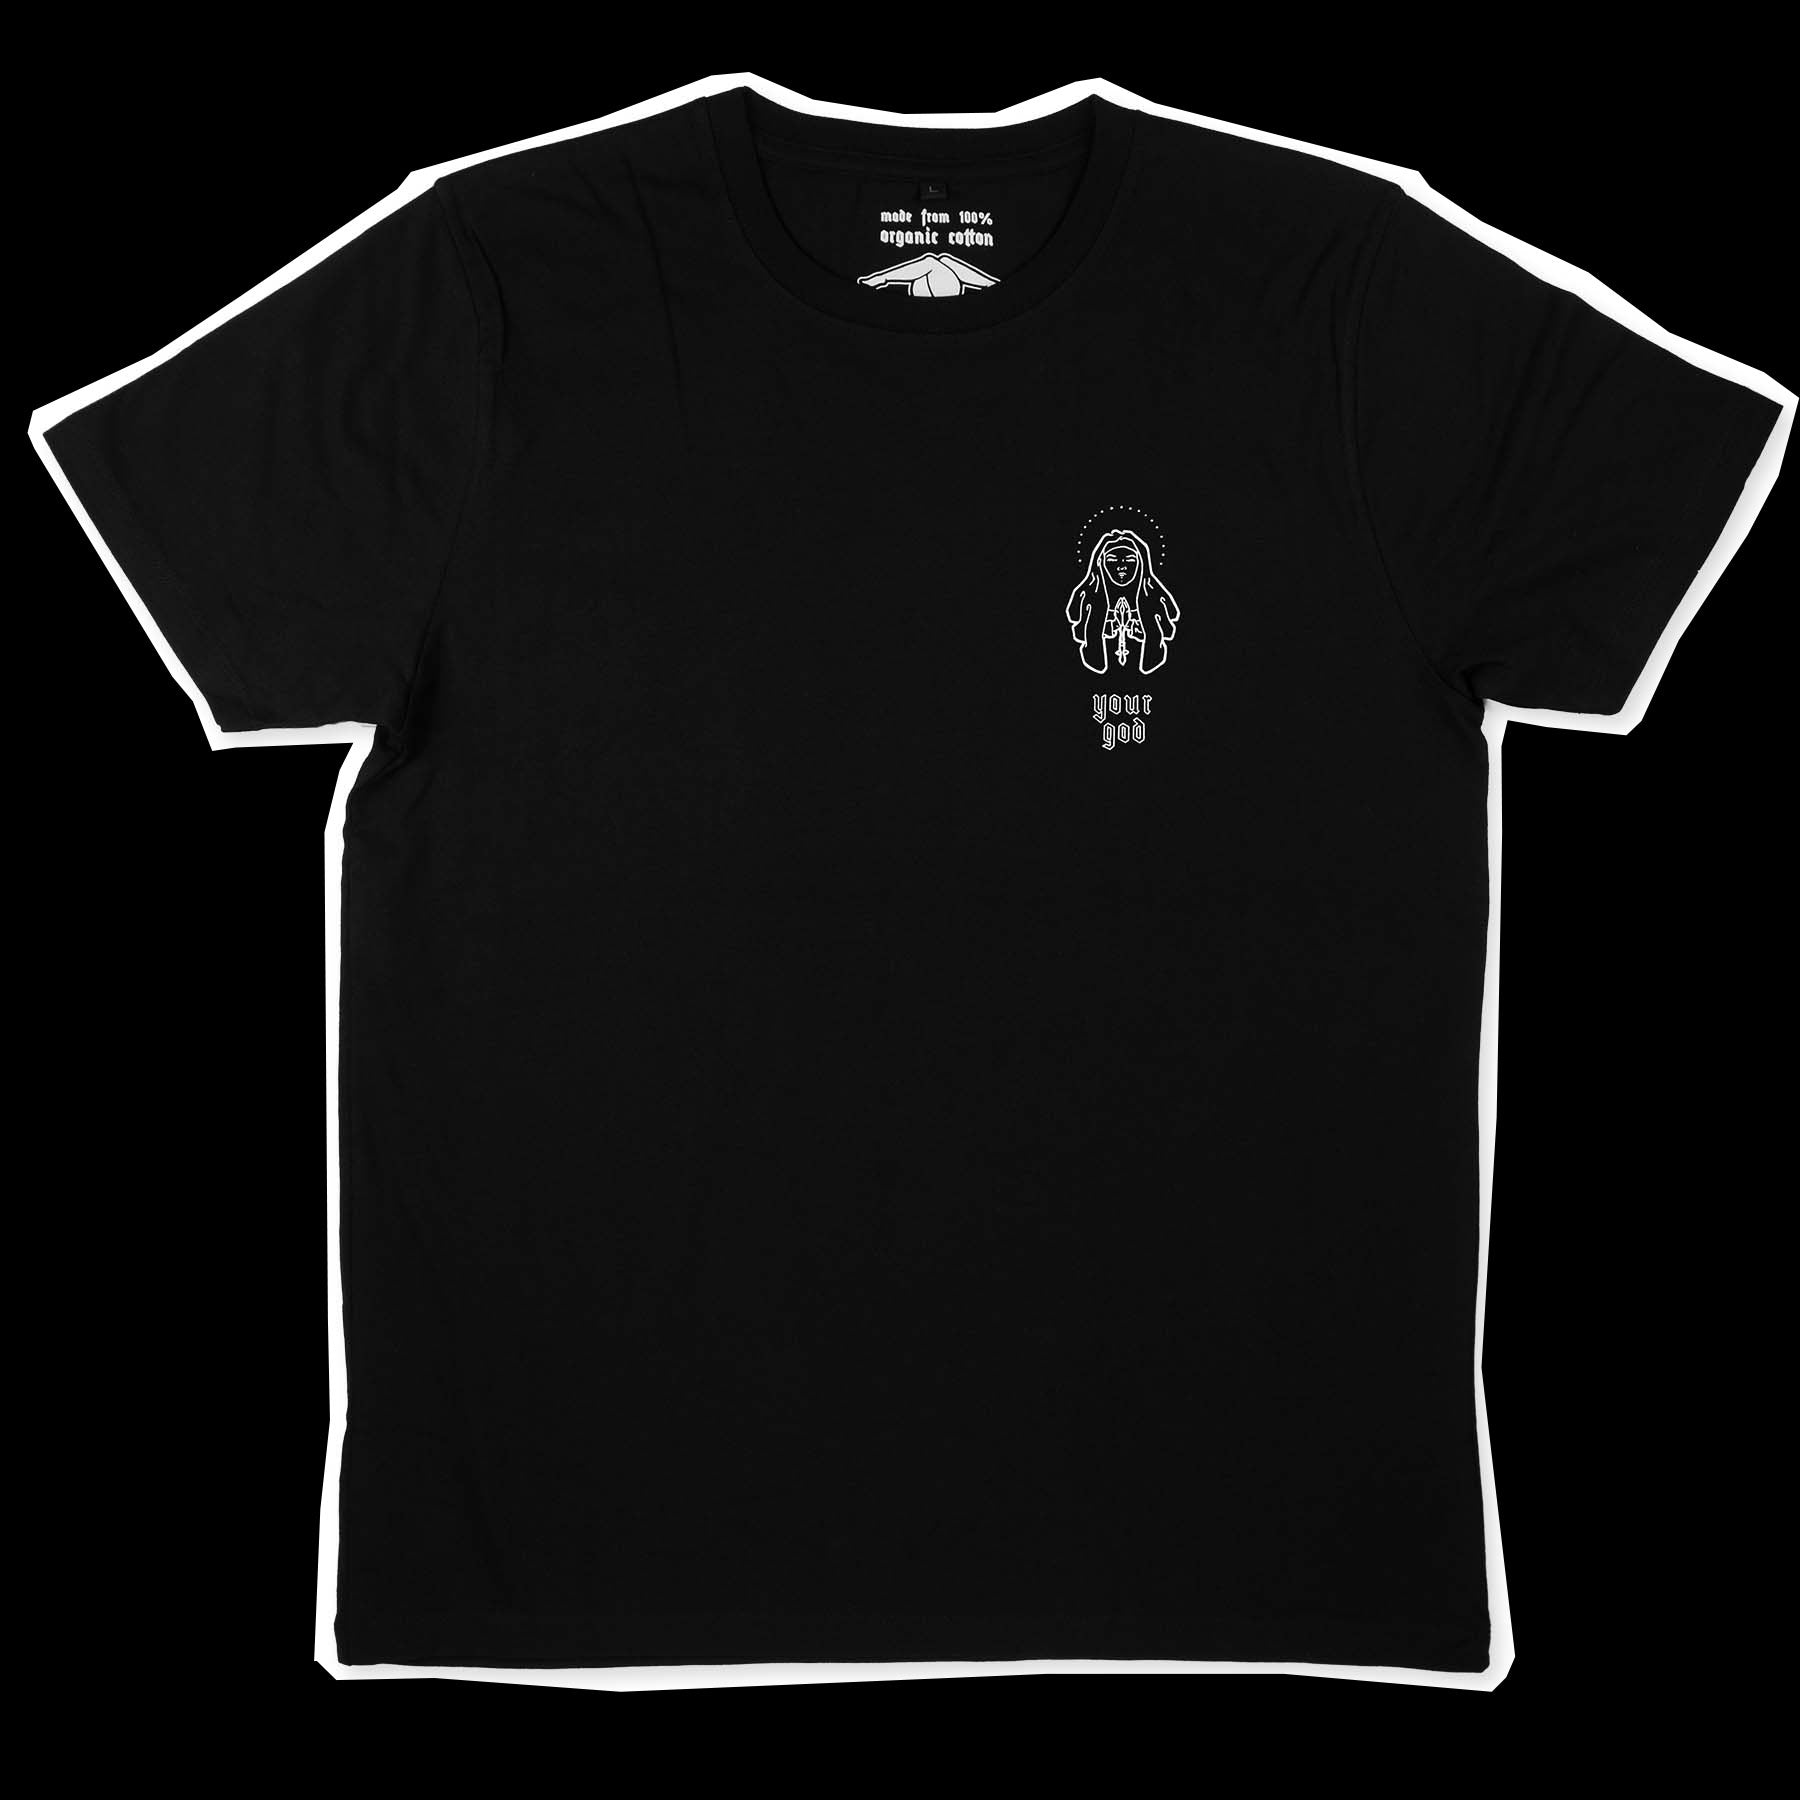 Black t-shirt with a white illustration of a praying nun who holds a cross in her hands. The screen-printing is on the left chest and says "your god"